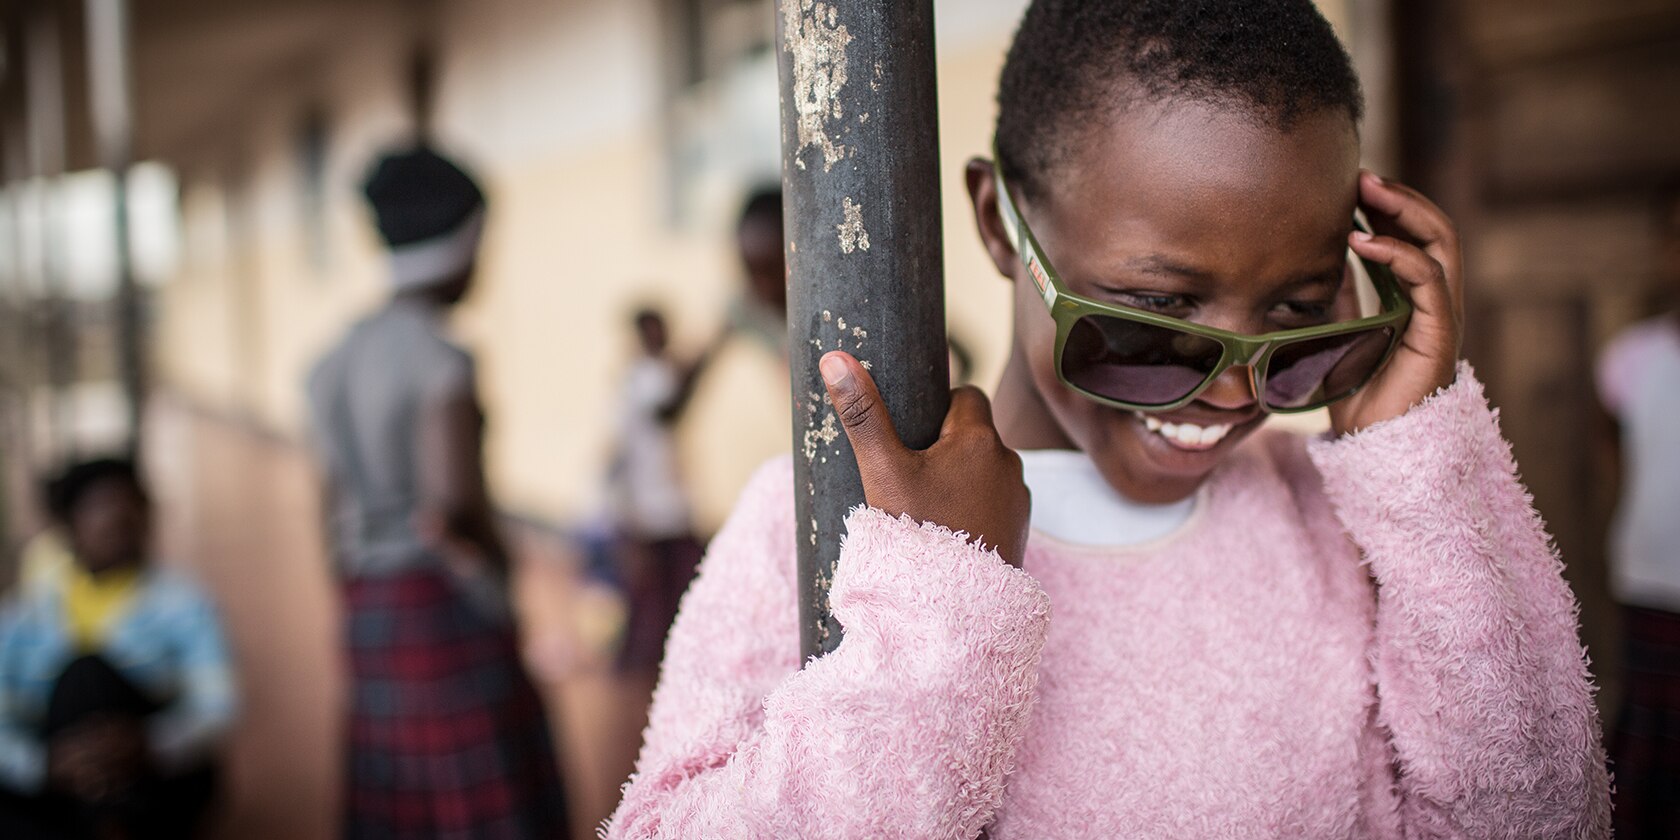 young girl wearing pink fuzzy sweater tries on green sunglasses while holding on to post